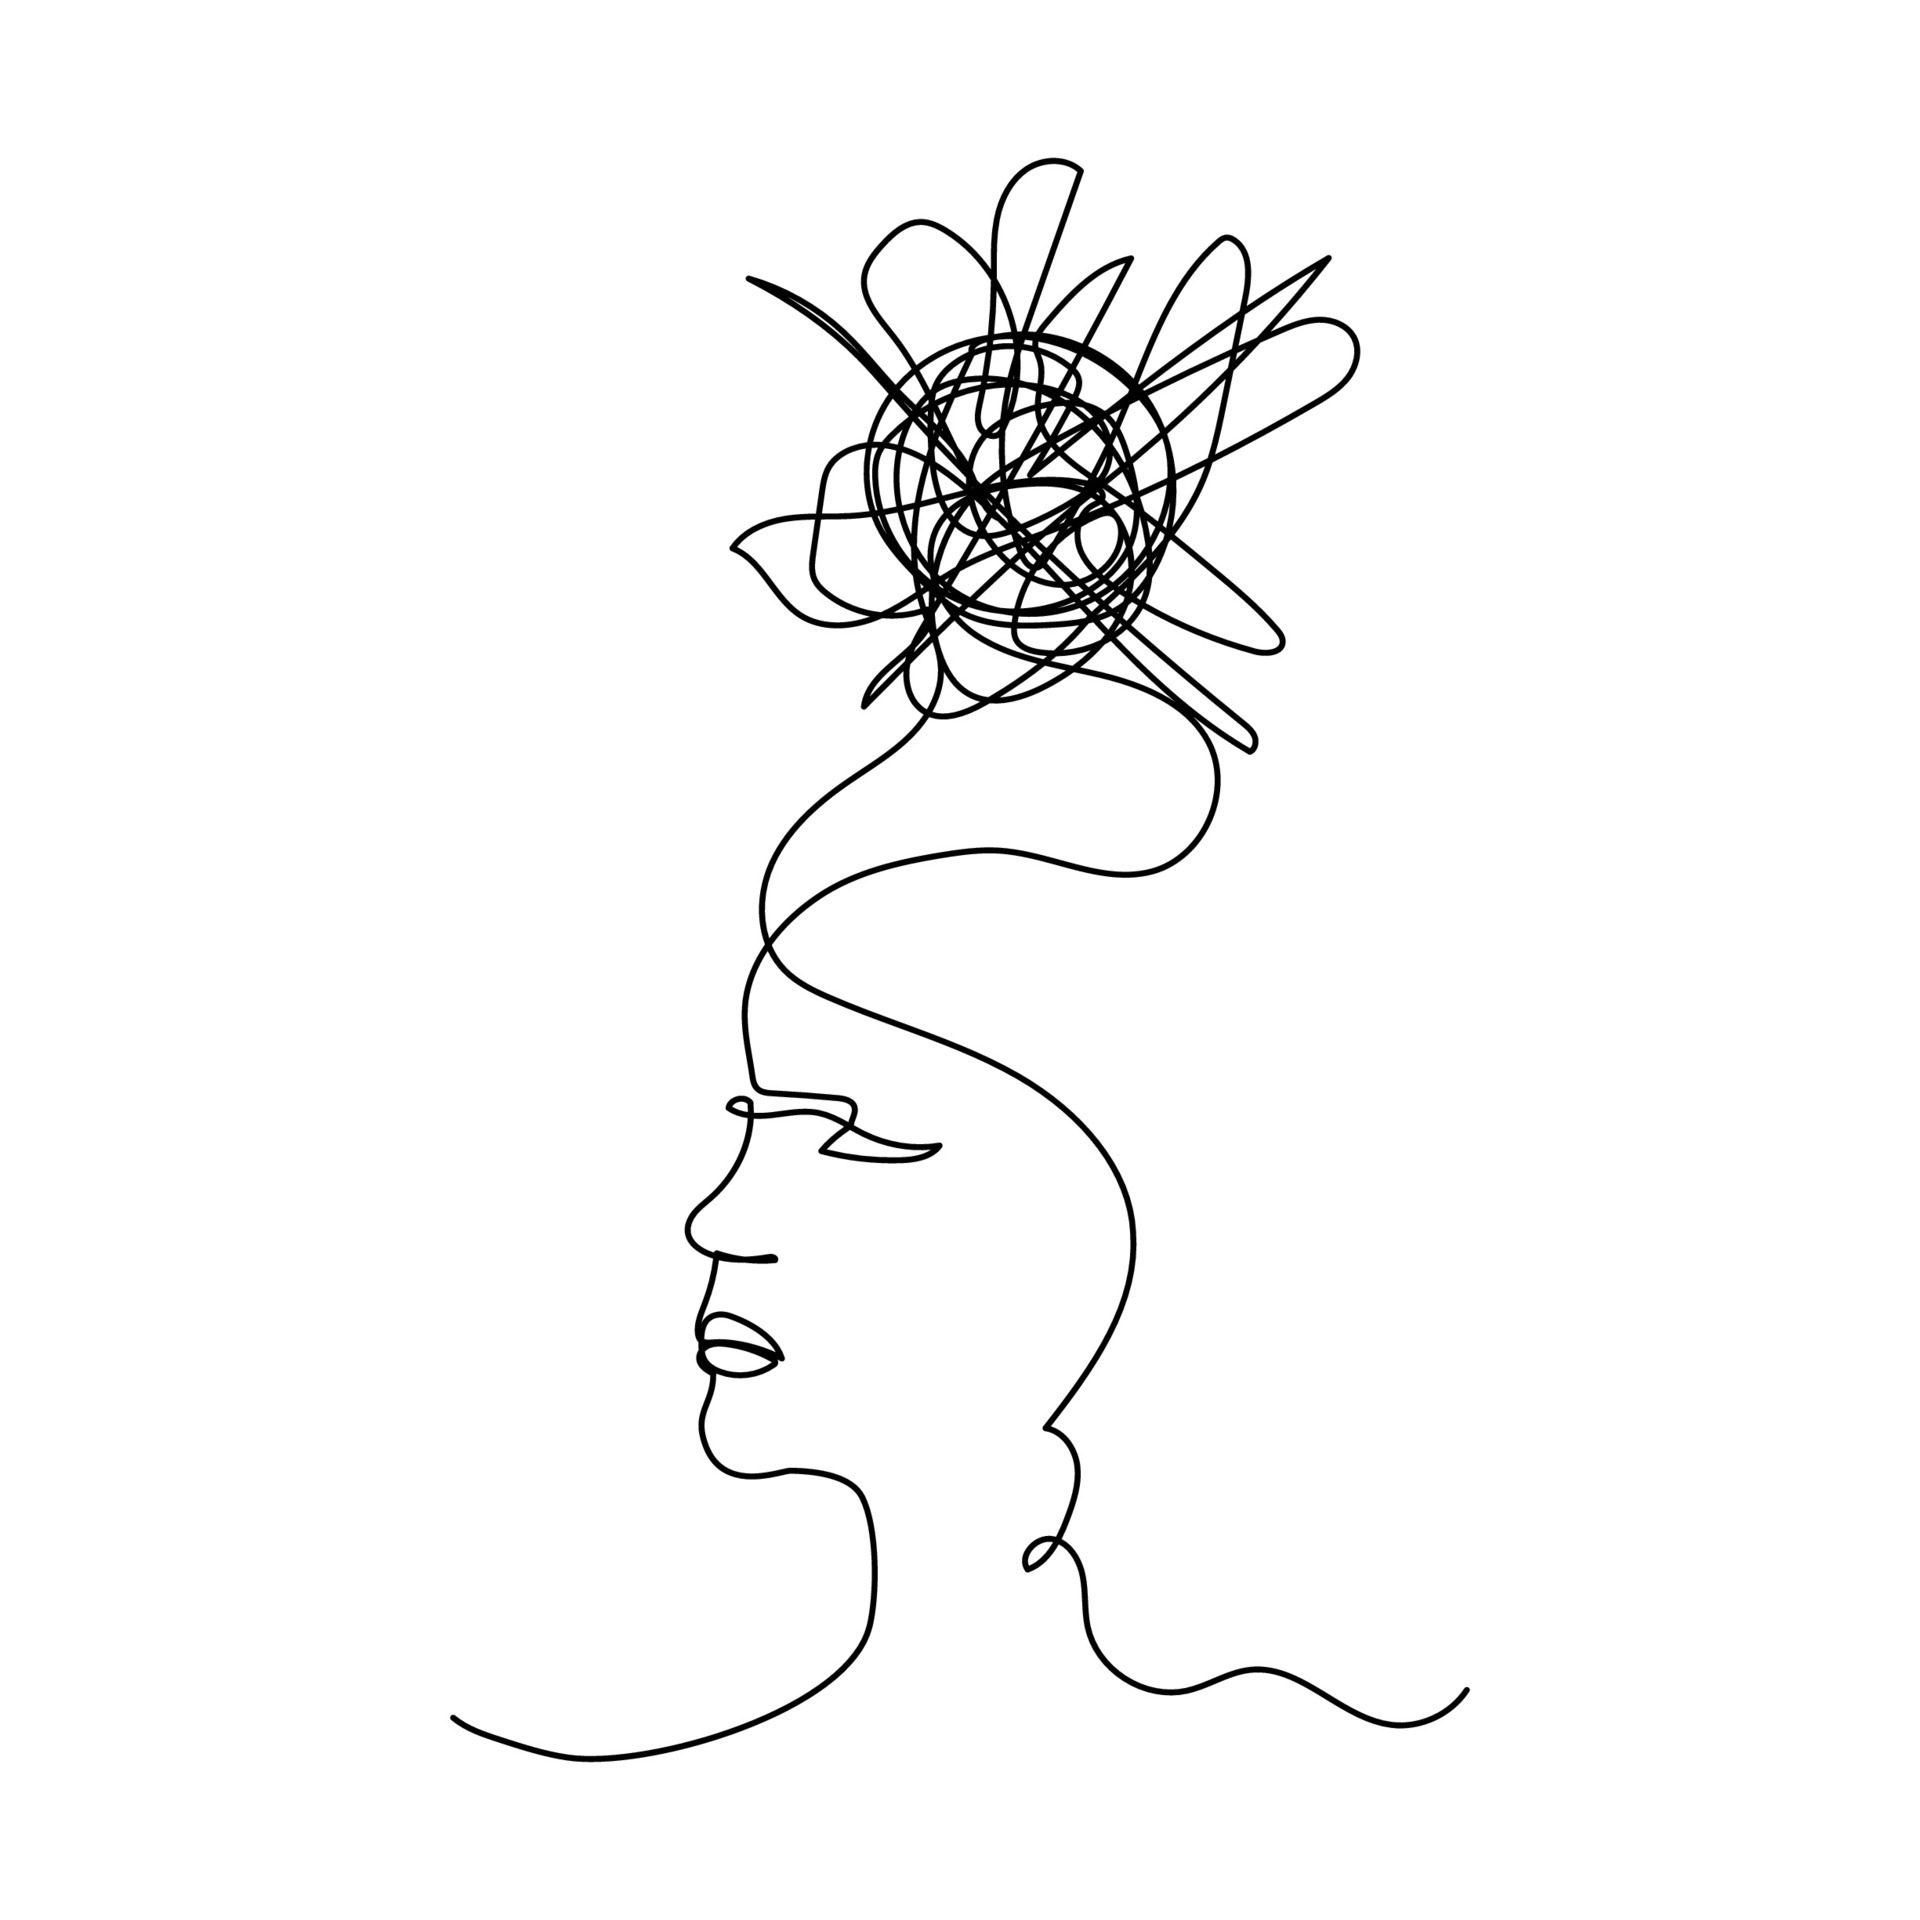 https://static.vecteezy.com/system/resources/previews/027/958/601/original/continuous-one-line-drawing-of-a-woman-with-confused-messy-feelings-worried-about-bad-mental-health-problems-stress-illness-and-depression-concept-in-simple-linear-style-doodle-illustration-vector.jpg